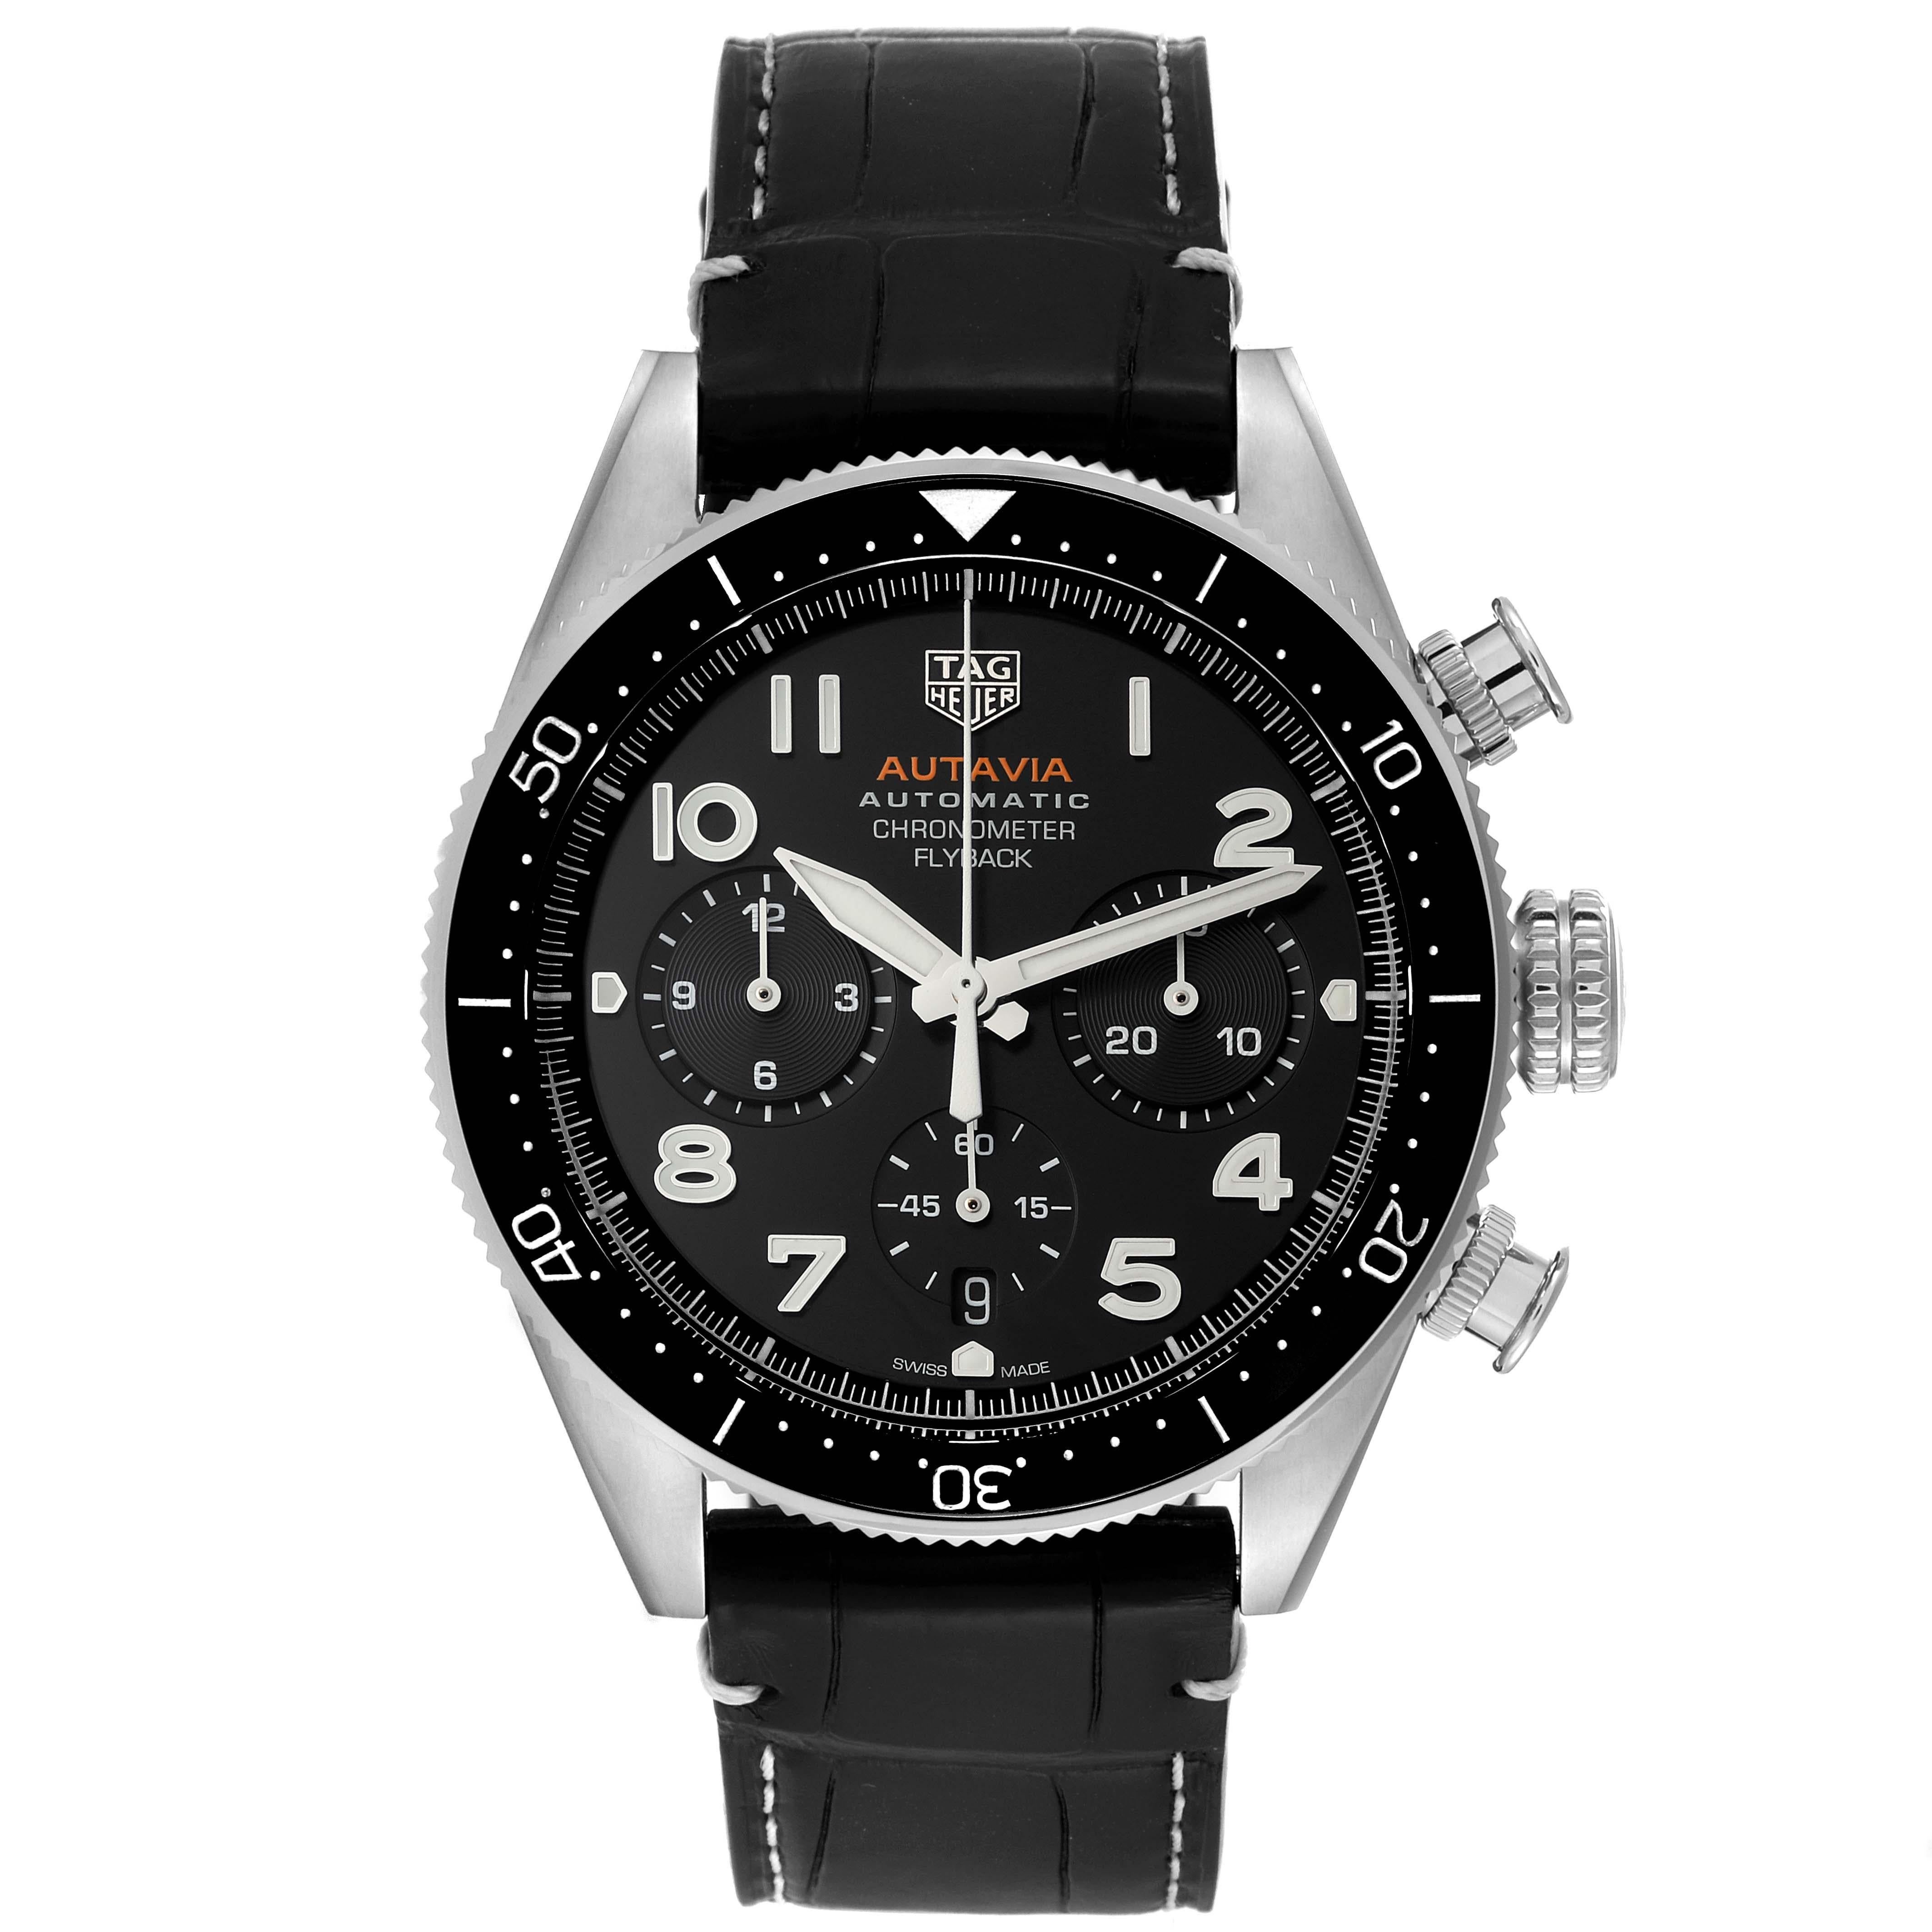 Tag Heuer Autavia Chronometer Flyback Steel Mens Watch CBE511A Unworn. Tag Heuer Caliber HEUER 02 COSC Flyback automatic self-winding chronograph movement. Stainless steel case 42 mm in diameter. Screw down crown. Transparent exhibition sapphire